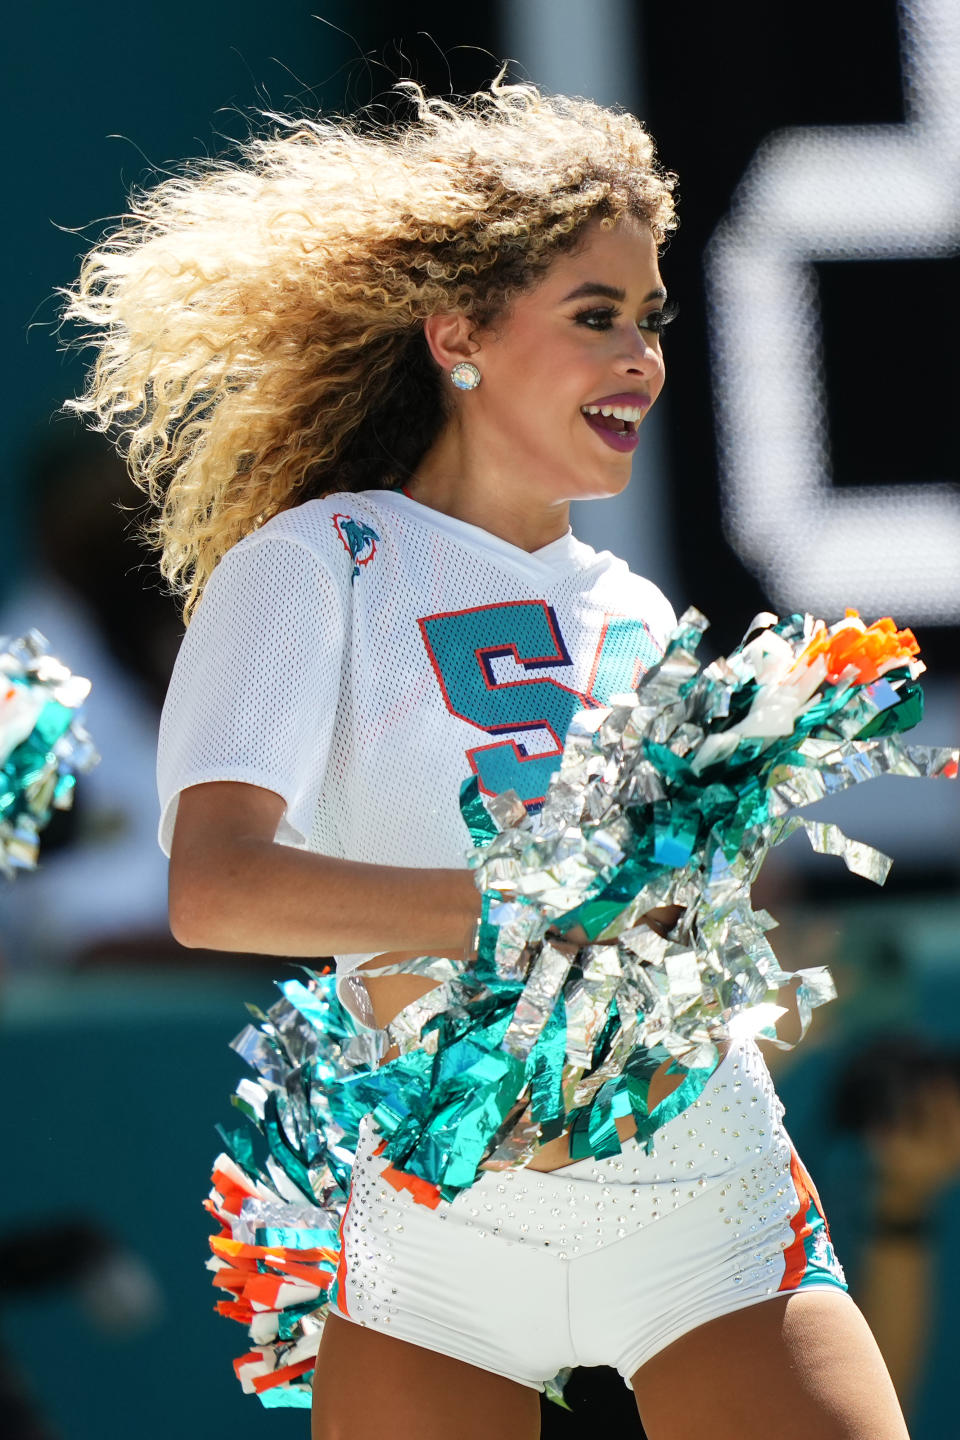 Oct 15, 2023; Miami Gardens, Florida, USA; A Miami Dolphins cheerleader performs during the first half between the Miami Dolphins and the Carolina Panthers at Hard Rock Stadium. Mandatory Credit: Jasen Vinlove-USA TODAY Sports